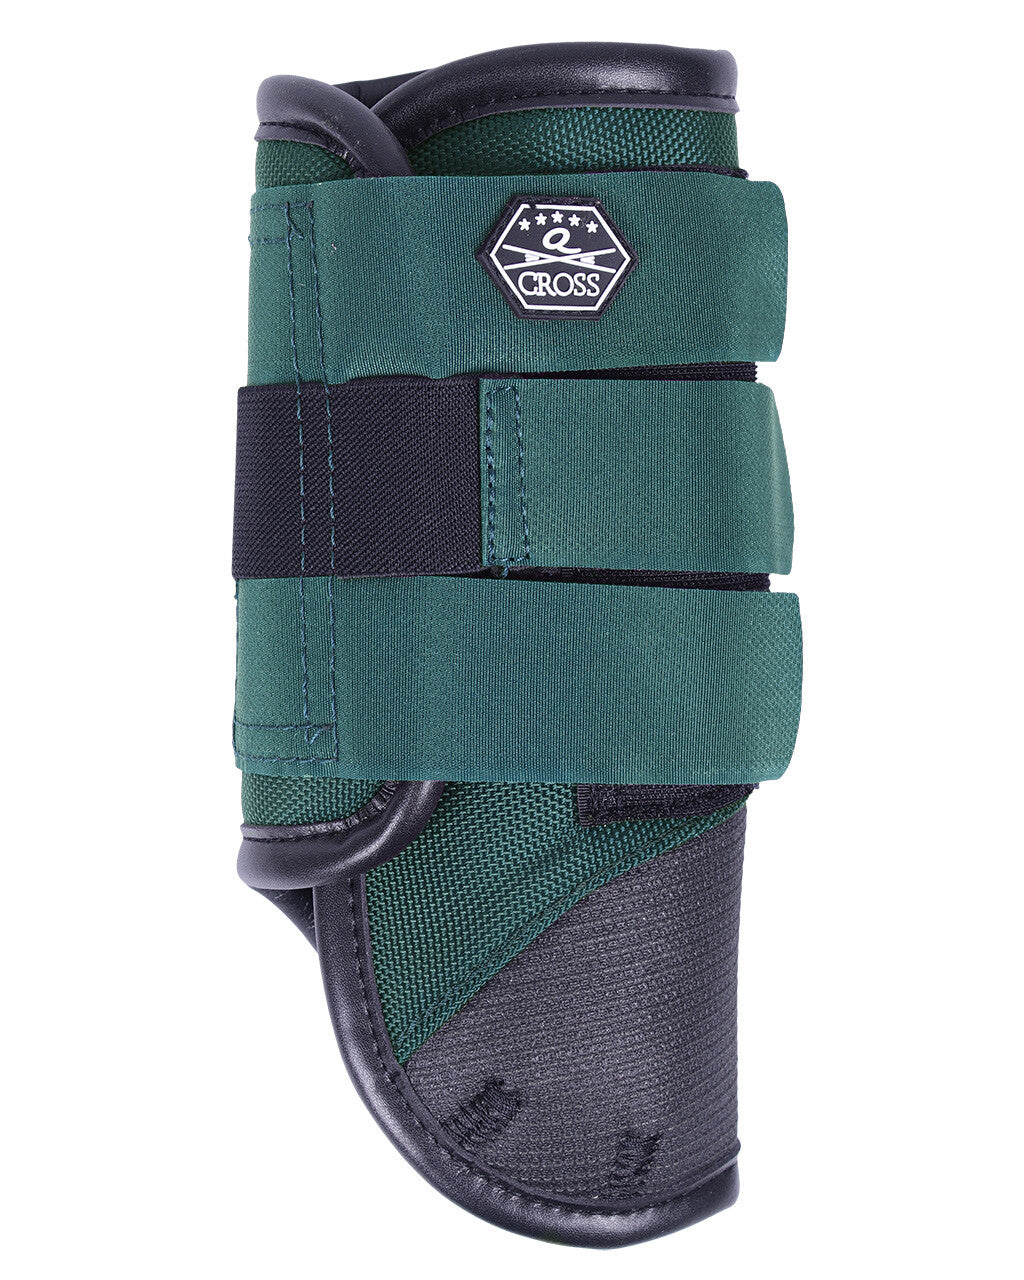 QHP Eventing boots front leg technical